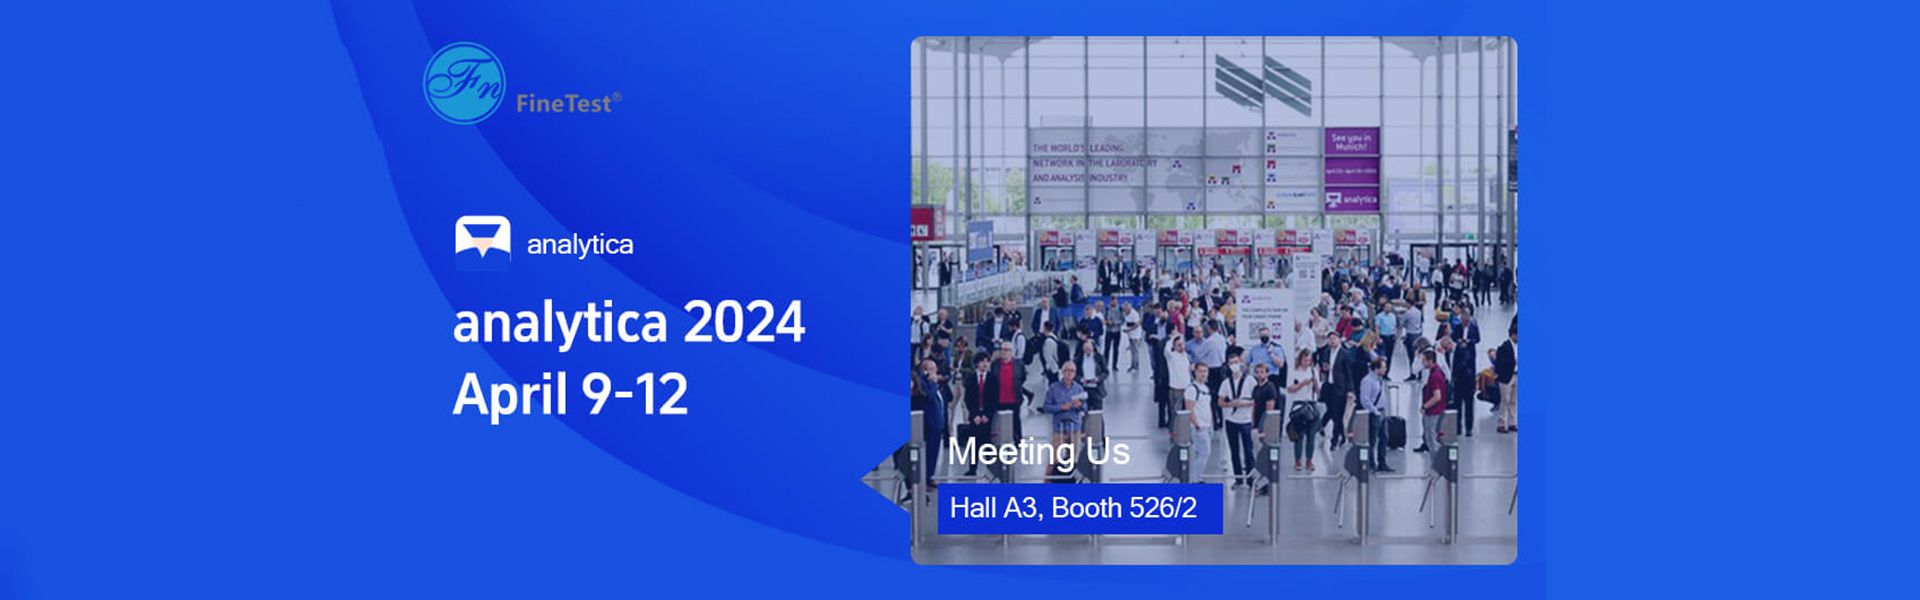 FineTest would like to invite you to visit the company's booth at Analytica Munich 2024.